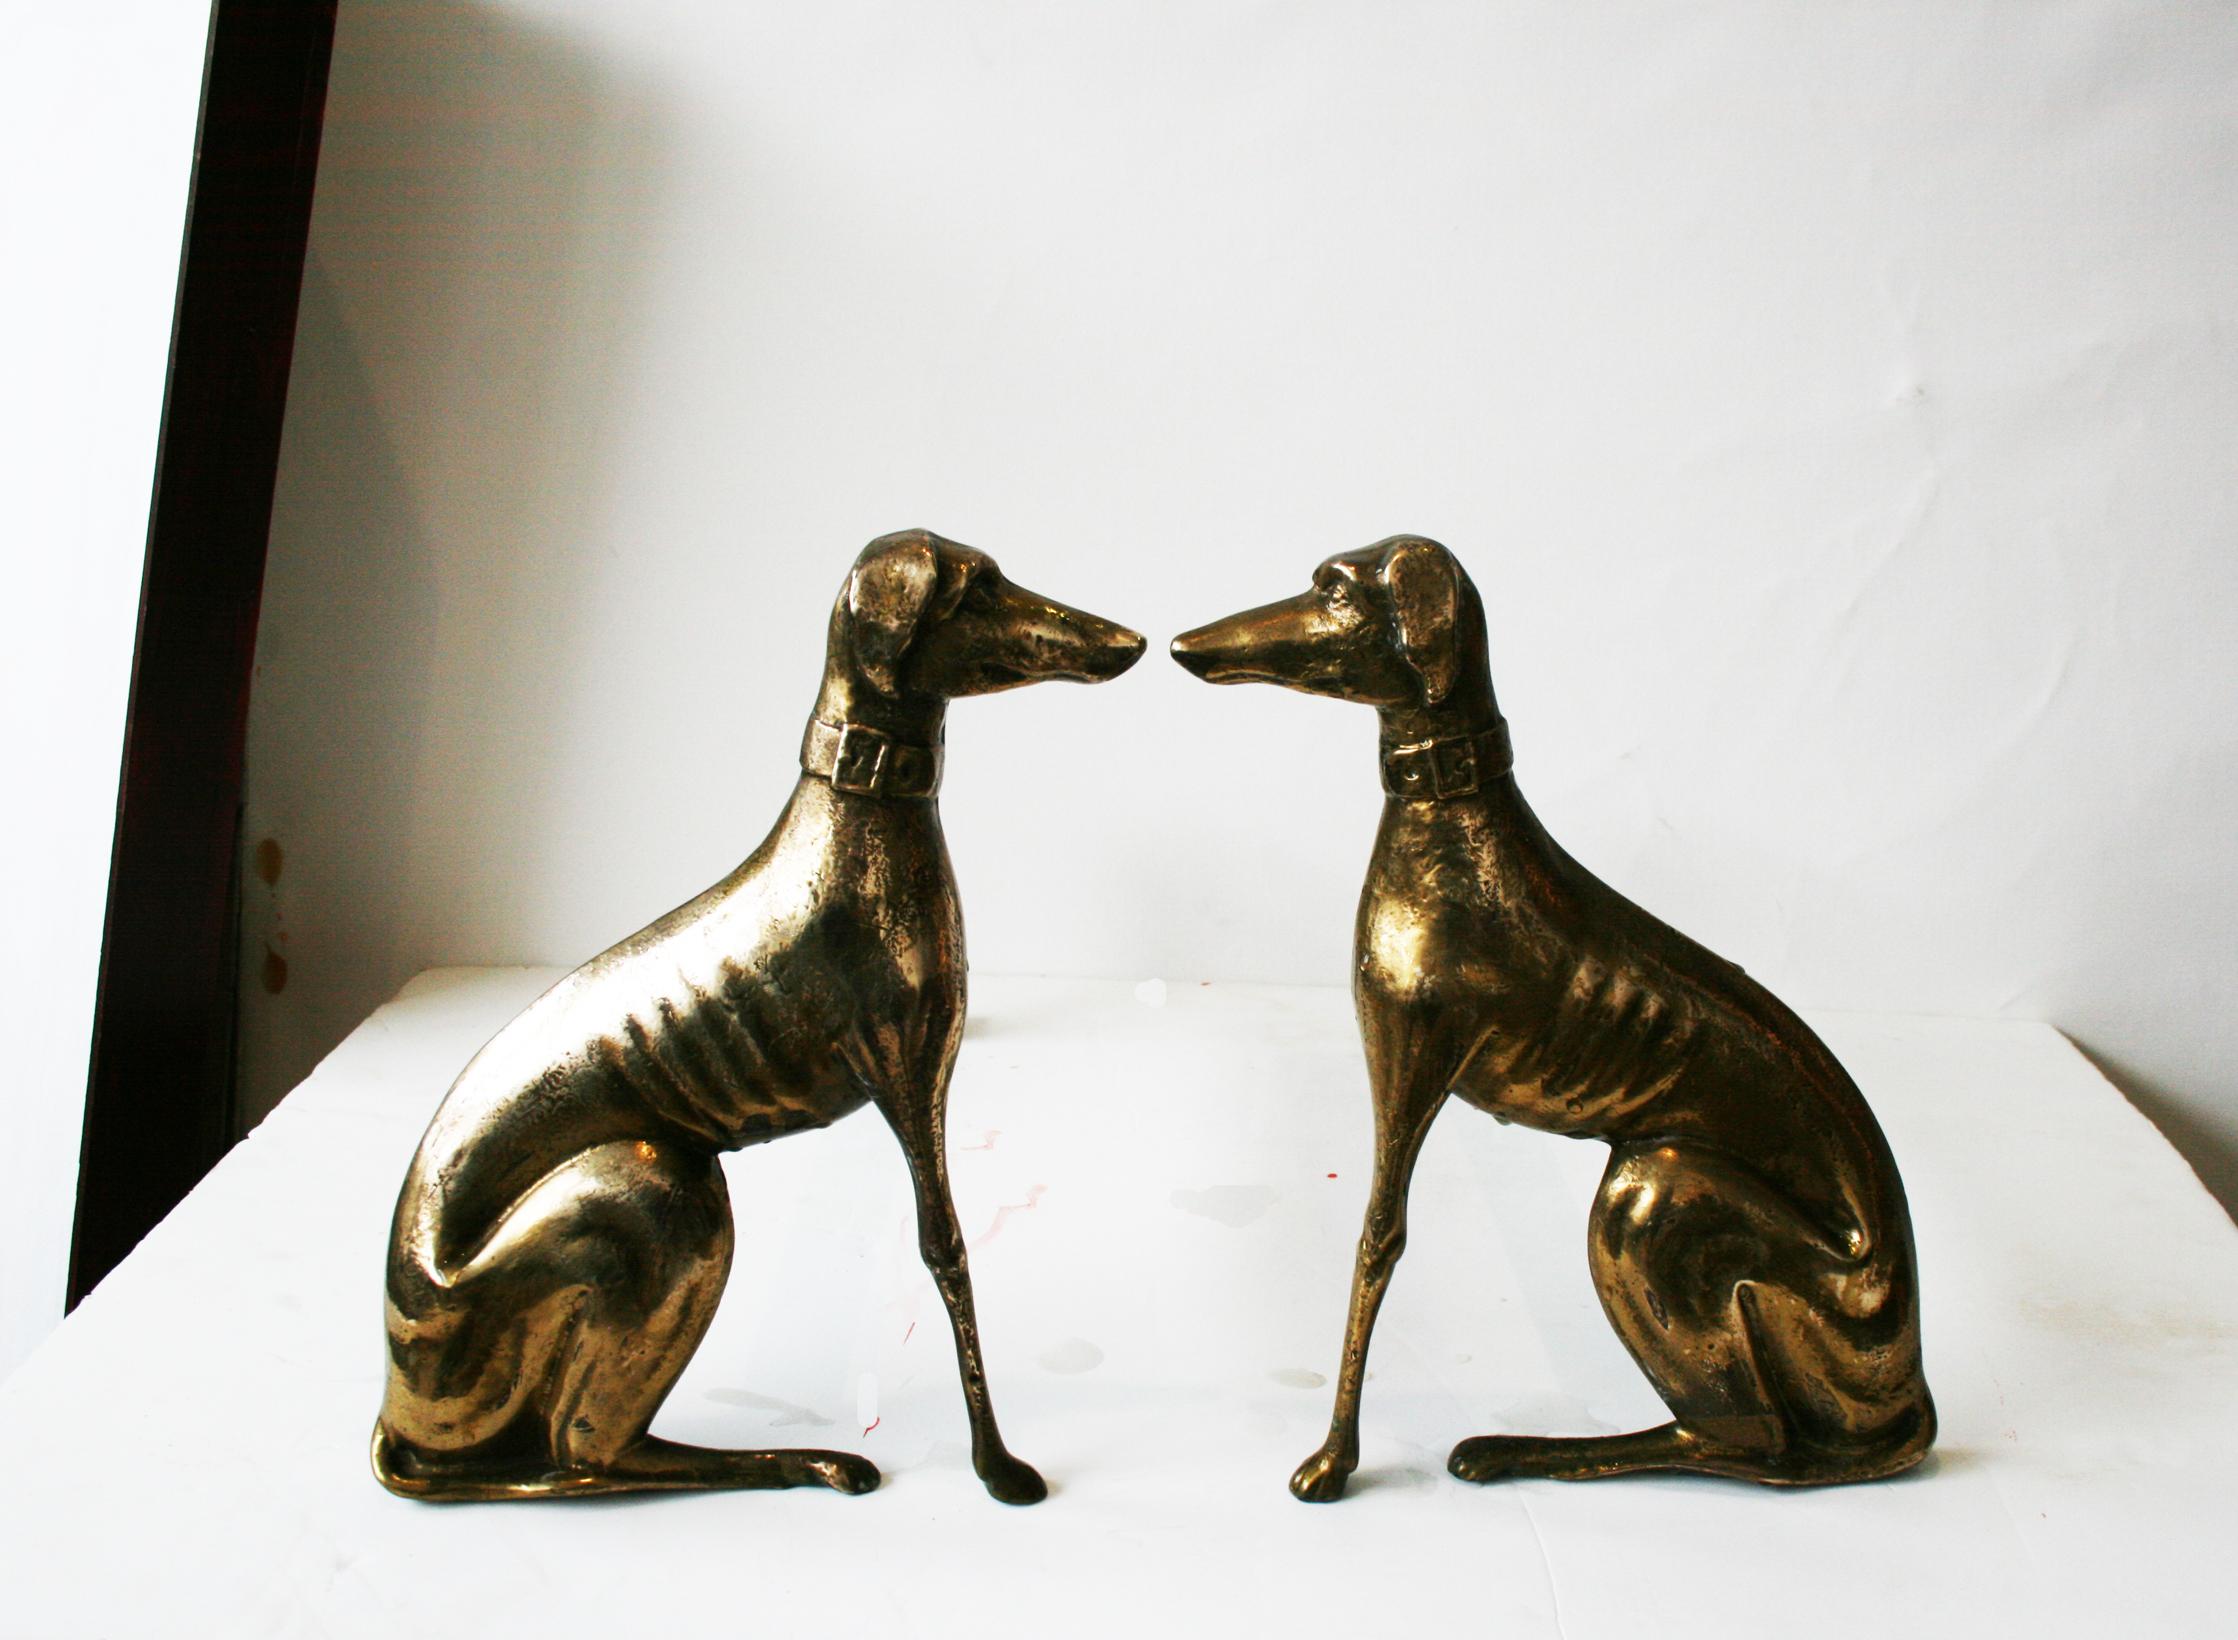 A pair of English brass greyhound dog andirons from the first half of the 20th century. This pair of brass andirons features two greyhounds facing each other. Their facial expressions along with the details of their bodies are skillfully